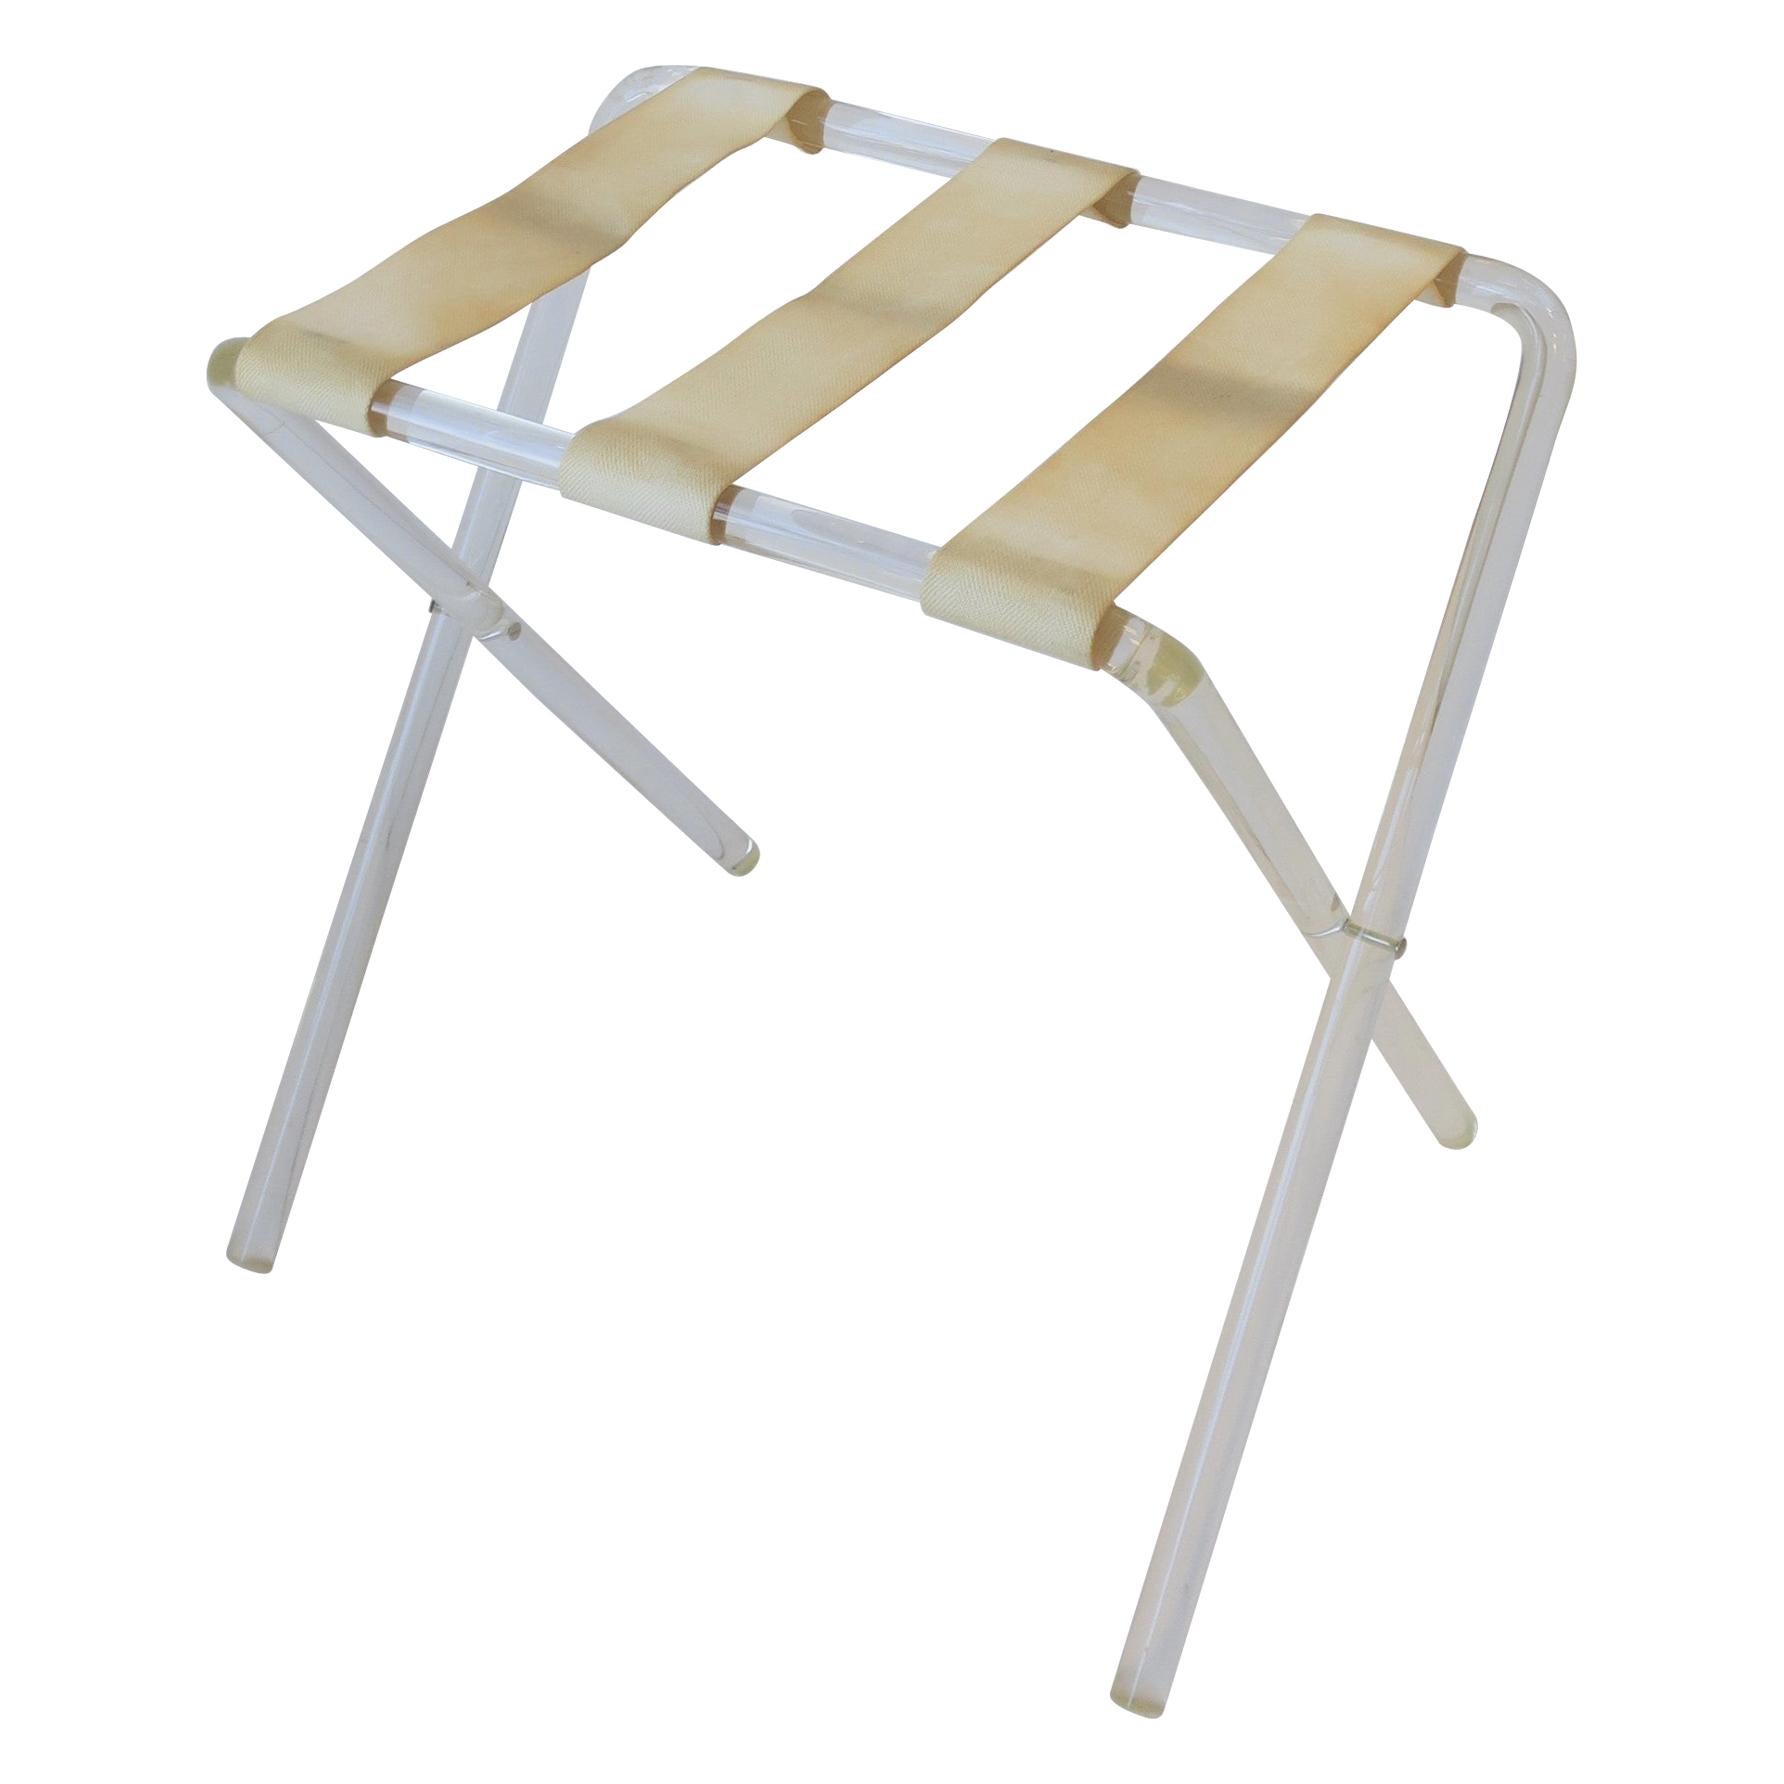 Modern Lucite Folding Luggage Rack or Stand